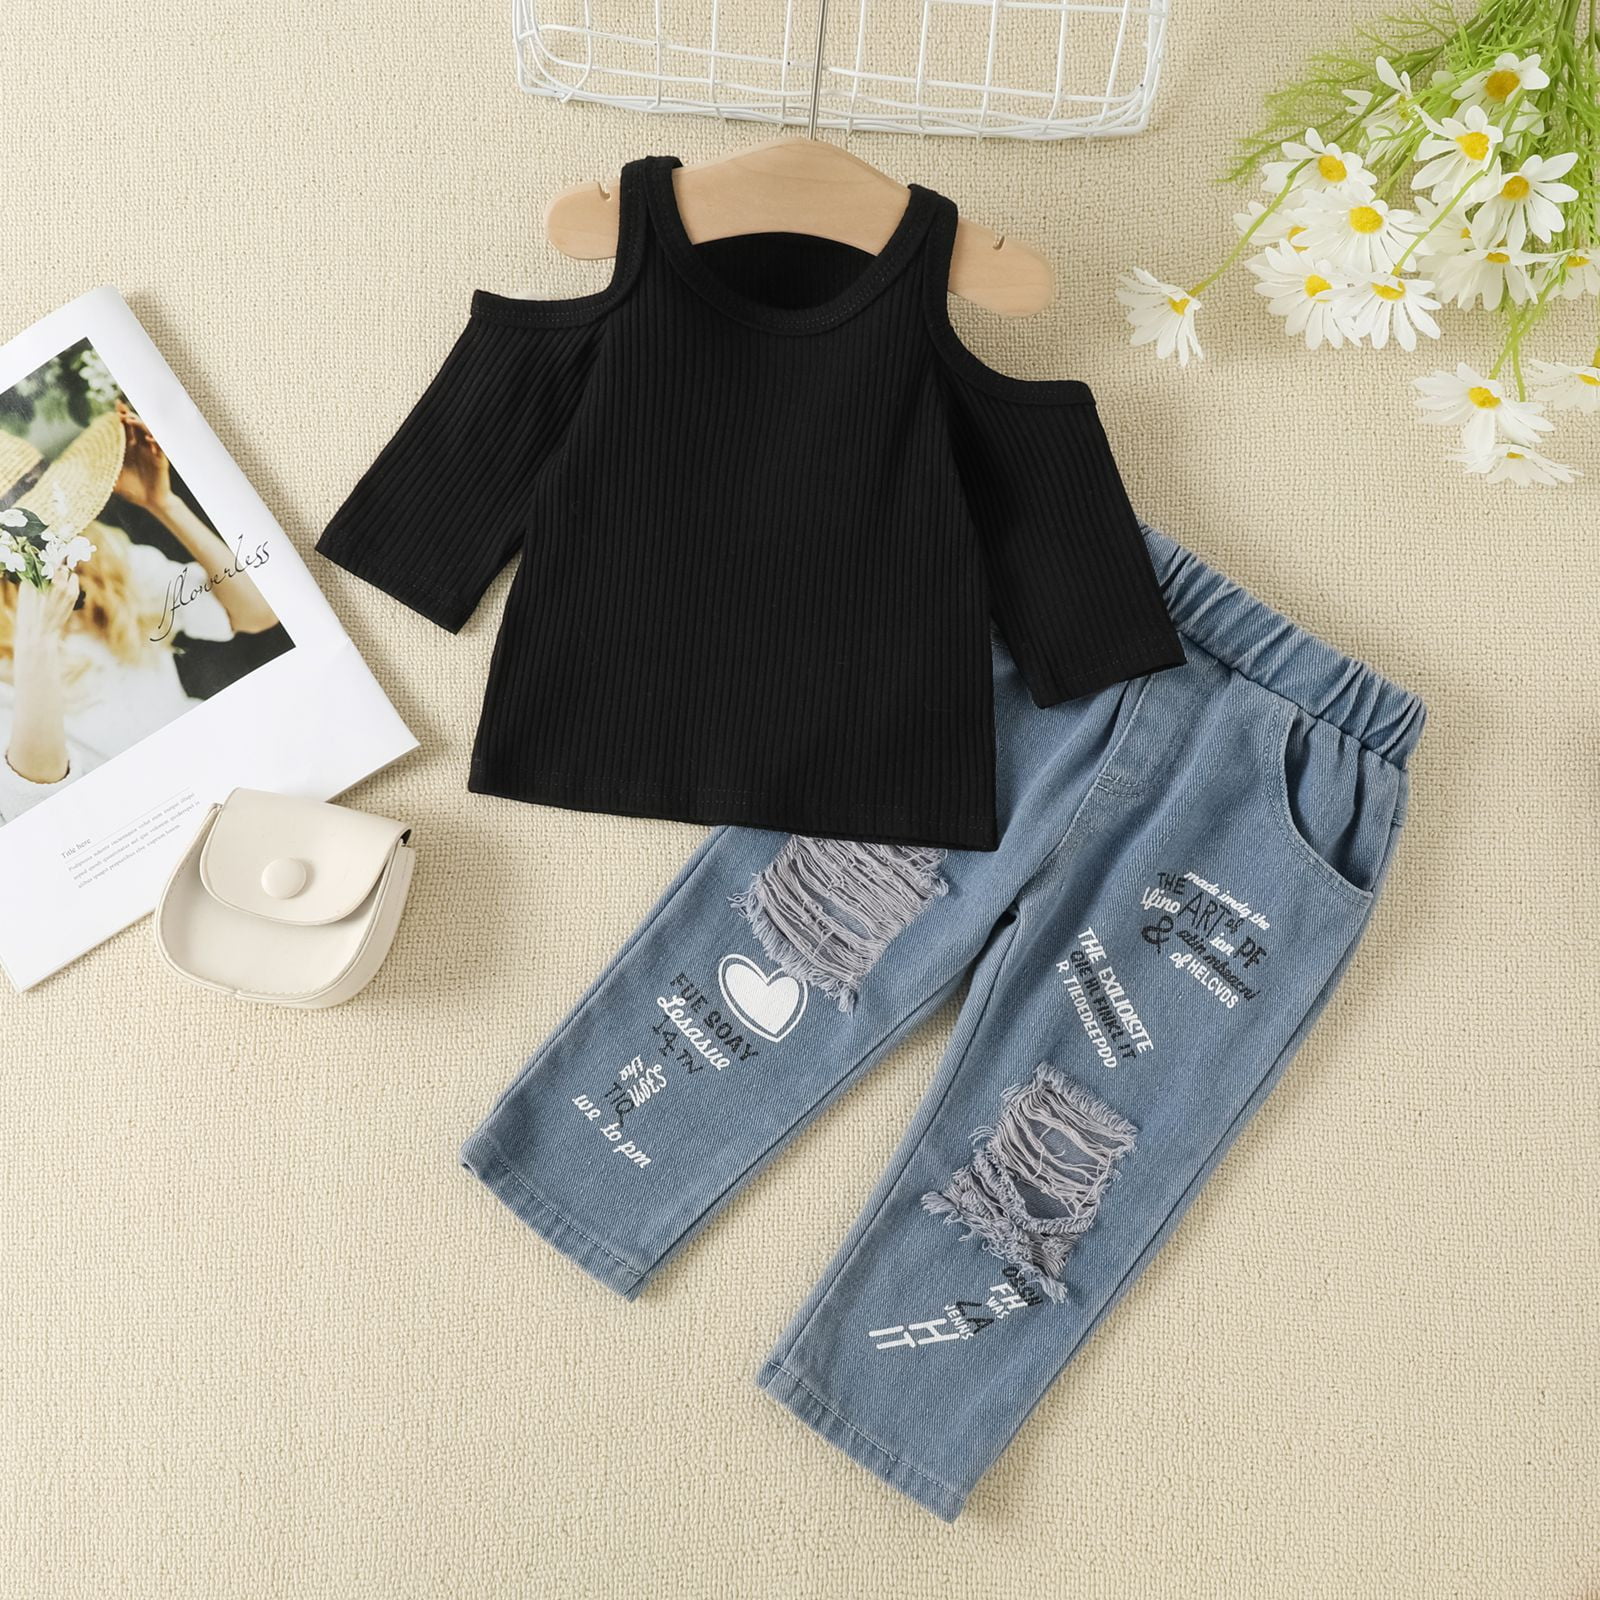 Newborn Baby Girl Ripped Hole Jeans Long Denim Pants Trouser Outfits Clothes  